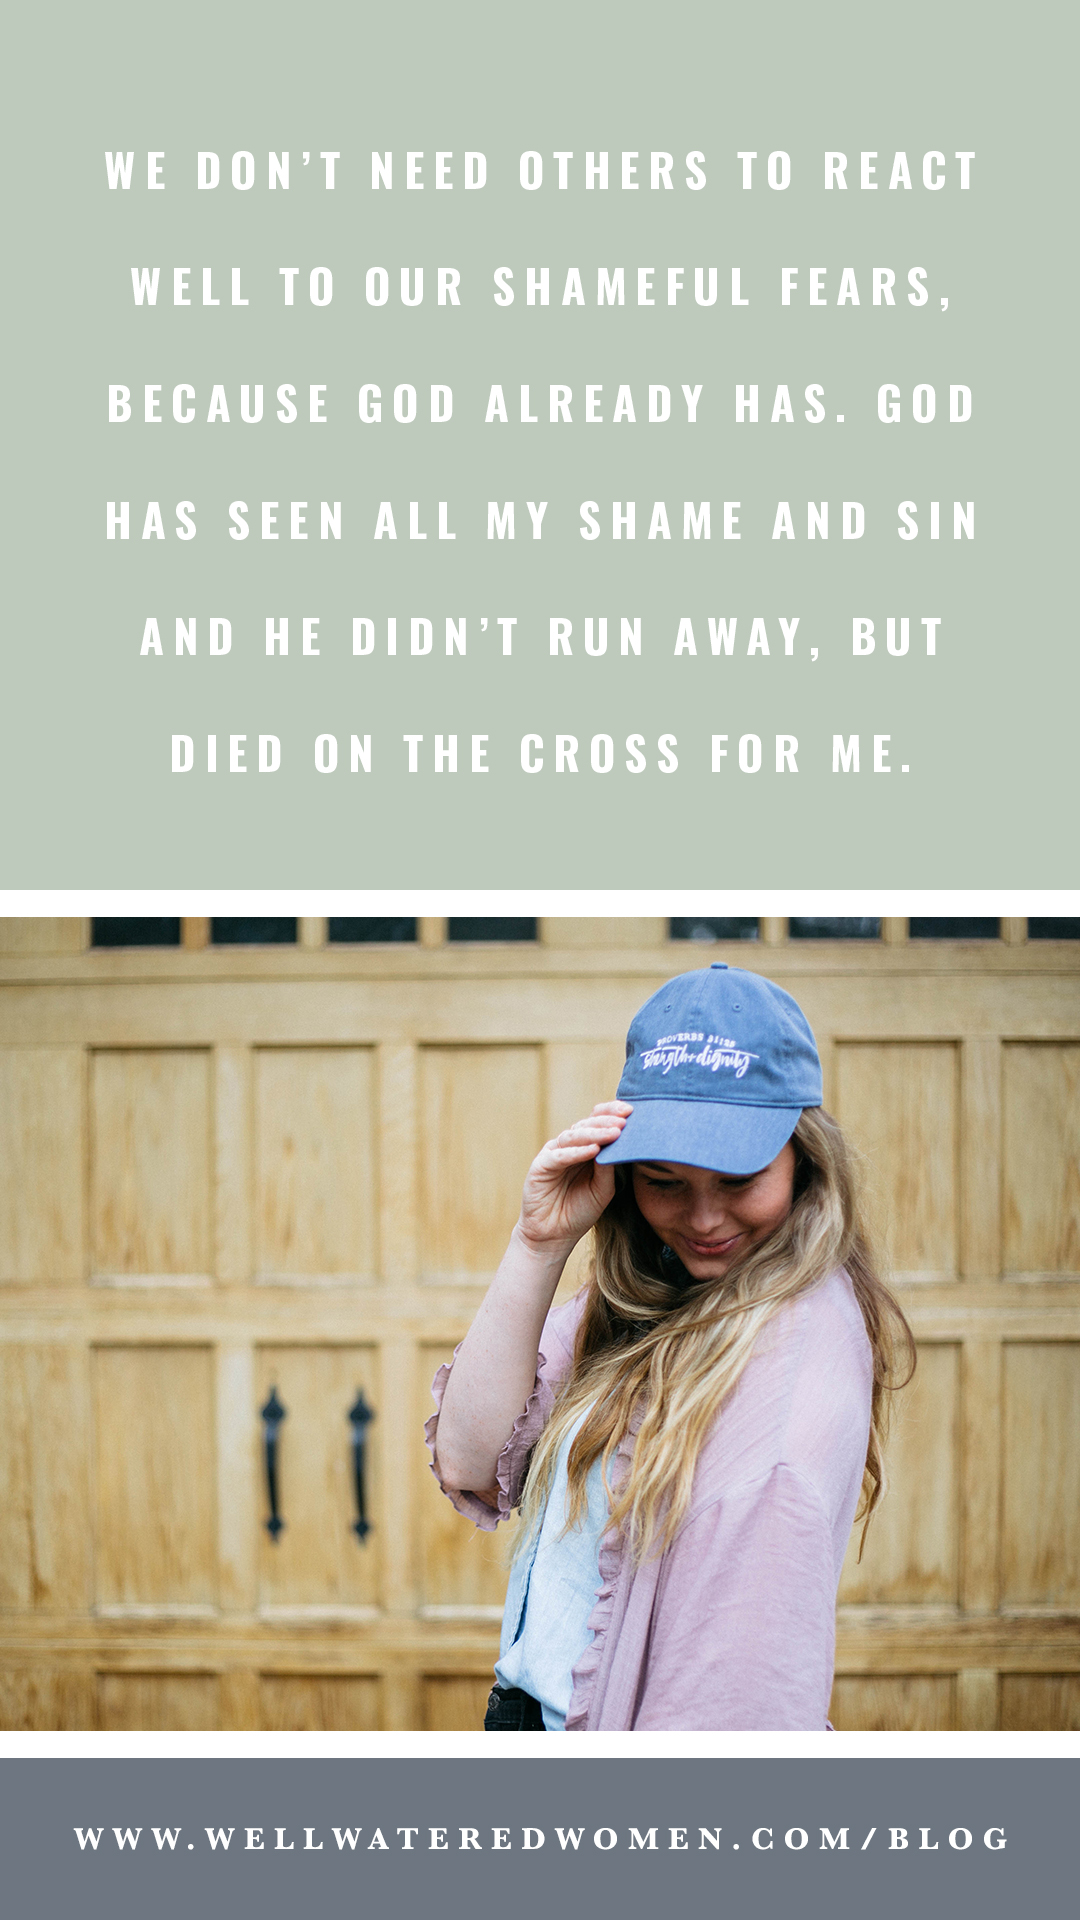 We don’t need others to react well to our shameful fears, because God already has. God has seen all my shame and sin and He didn’t run away, but died on the cross for me. If God is the only One left when all see my shame, then I have more than enough—because God is enough. | Behind Closed Doors: Fearr and Food | Well-Watered Women